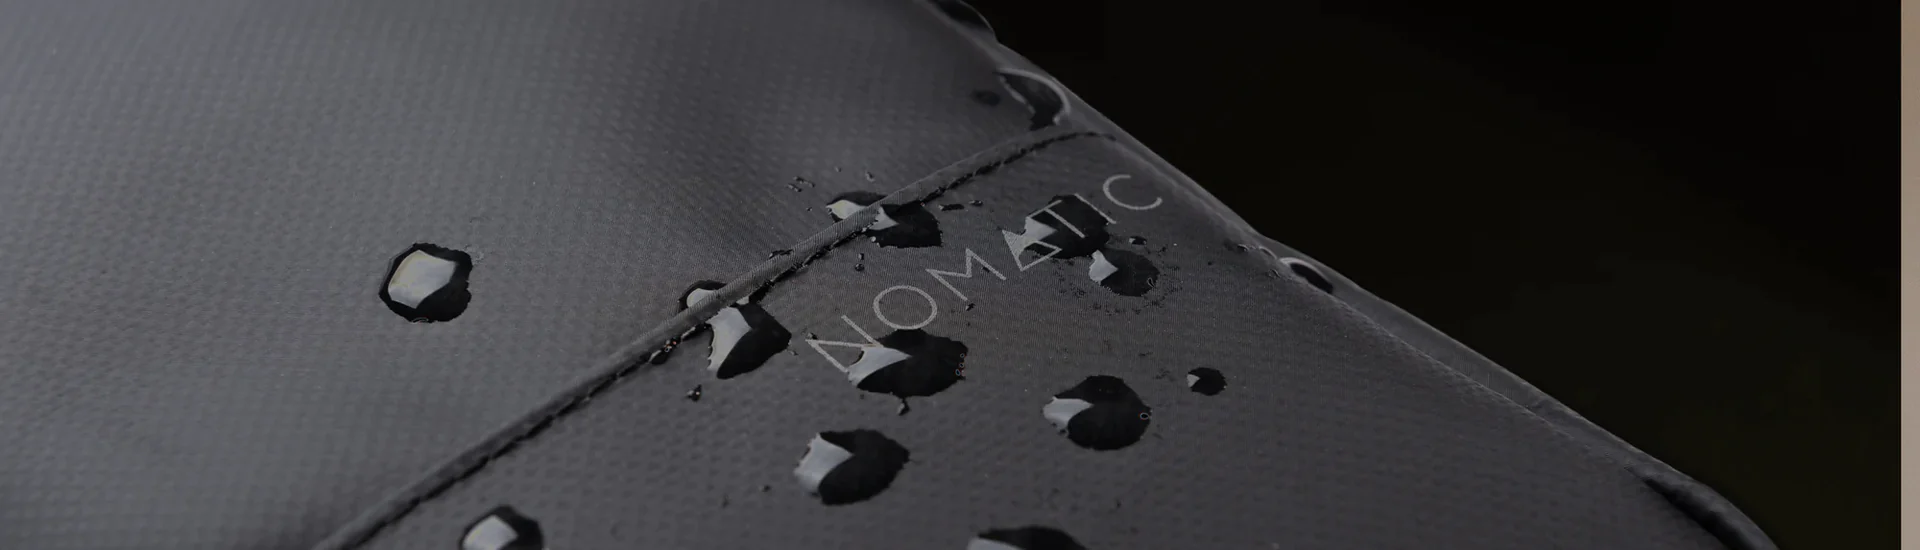 MEET THE NOMATIC LAUNDRY BAG -CLEAN AND DURABLE